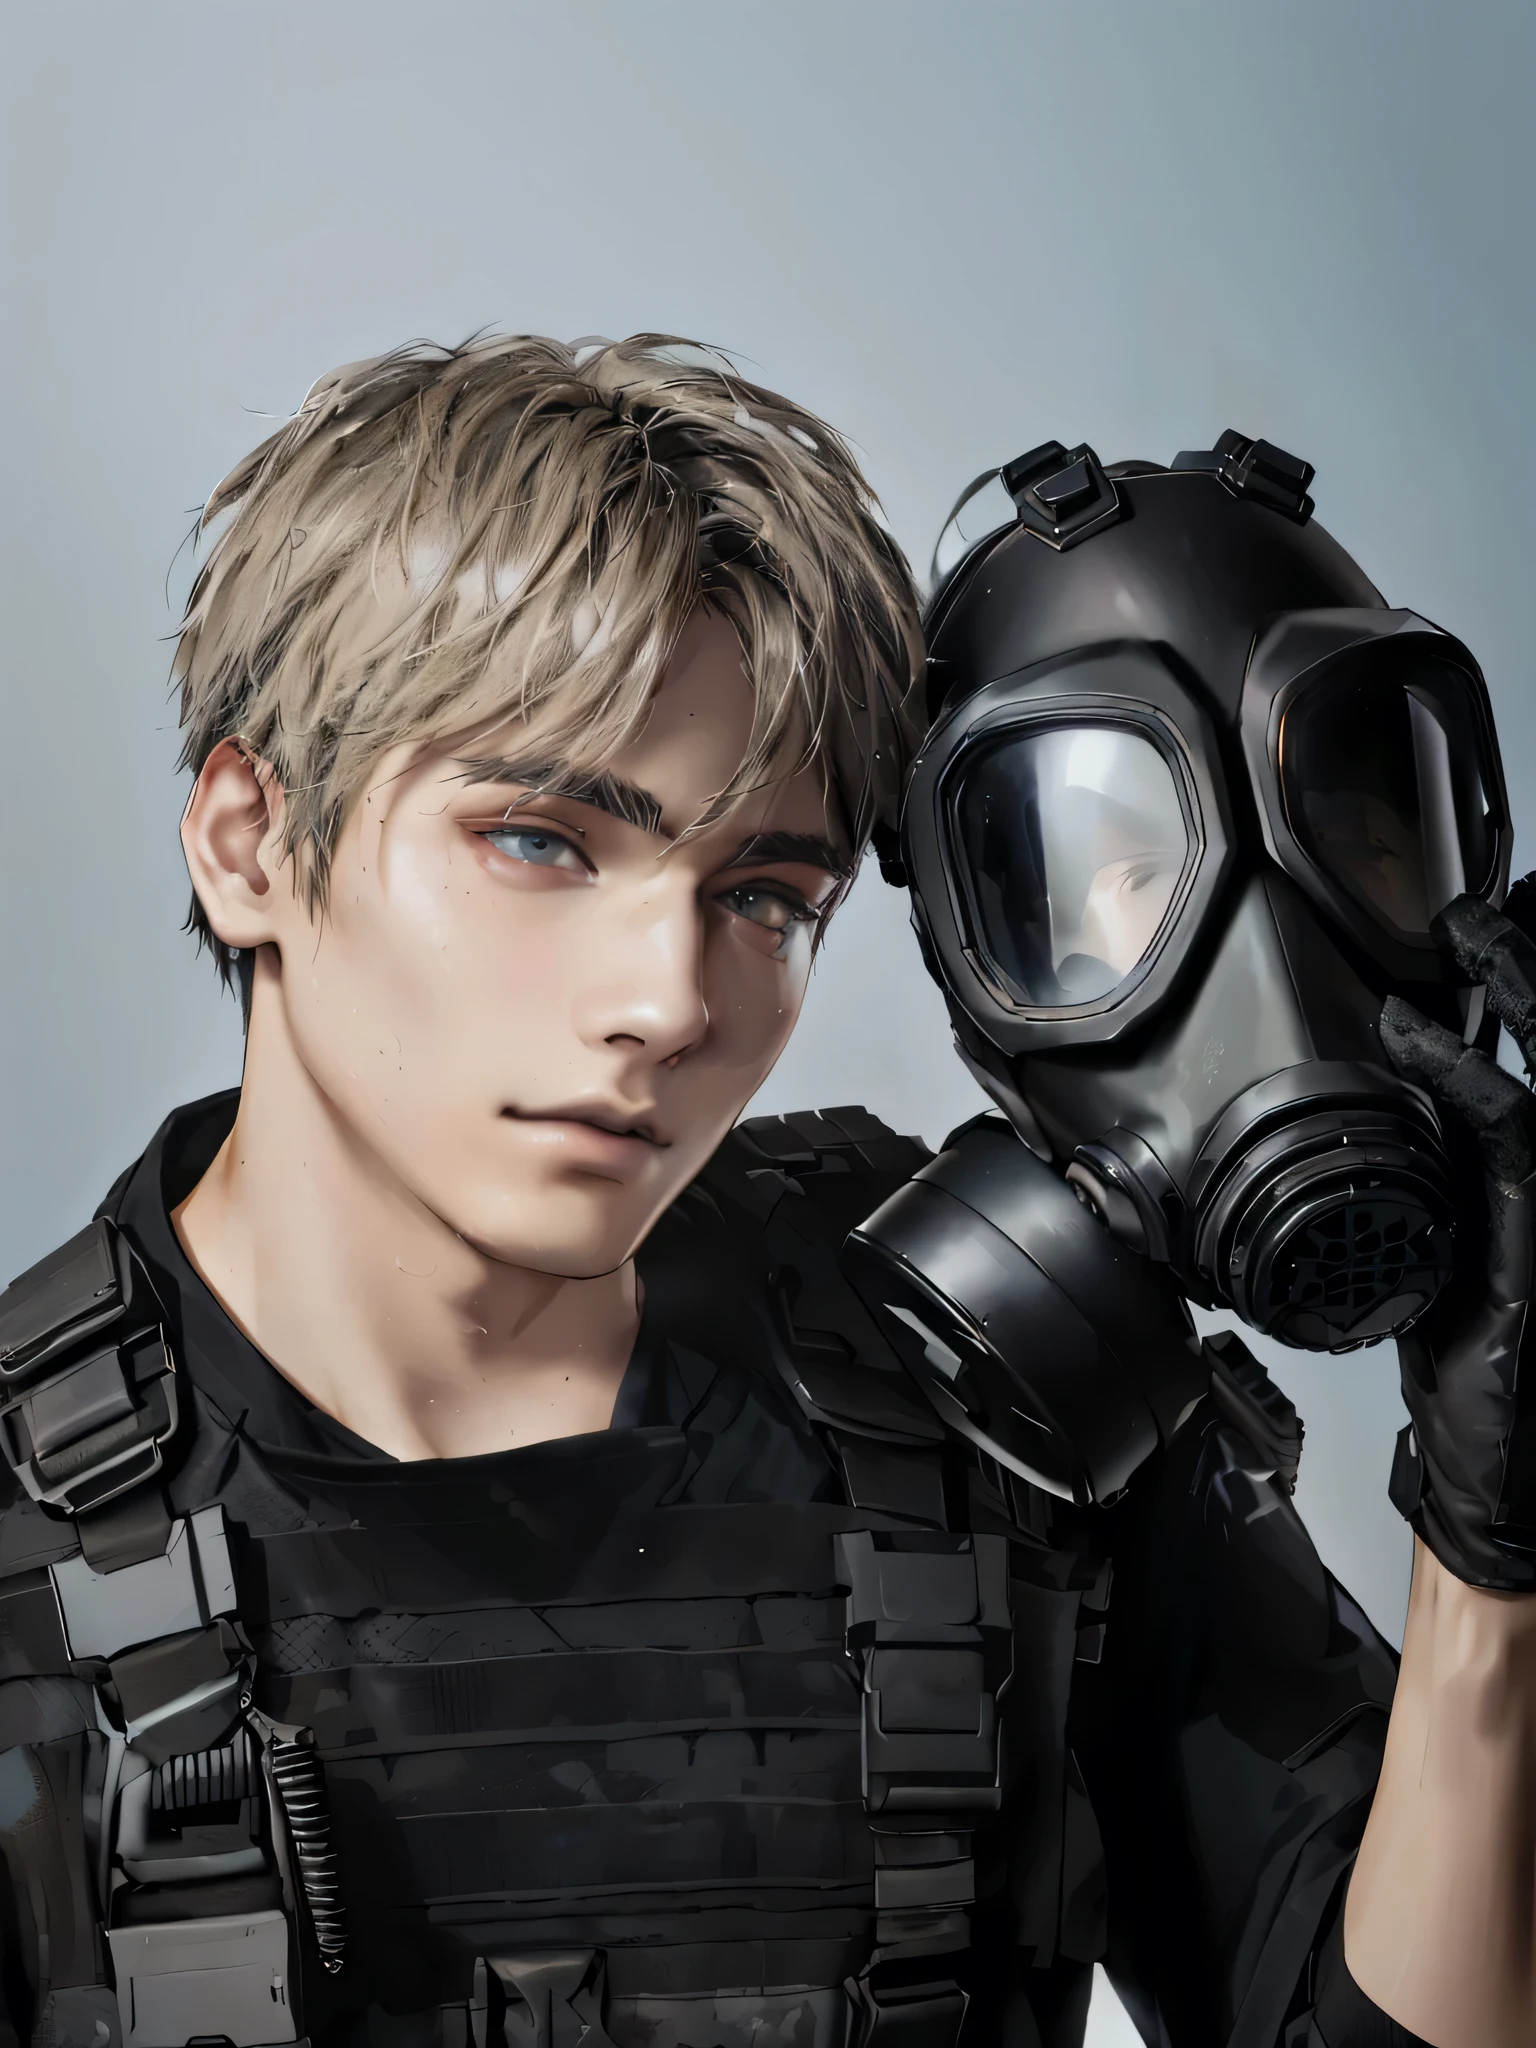 arafed man in a gas mask holding a gas mask, cai xukun, wearing an all black mempo mask, wearing space tech clothing, wearing technical clothing and armor, wearing Japanese technical clothing, wearing a gas mask, hombre surcoreano, Technological fashion, look y ropa techwear, xqc, futuristic techwear, dystopian science fiction character, primer plano retrato